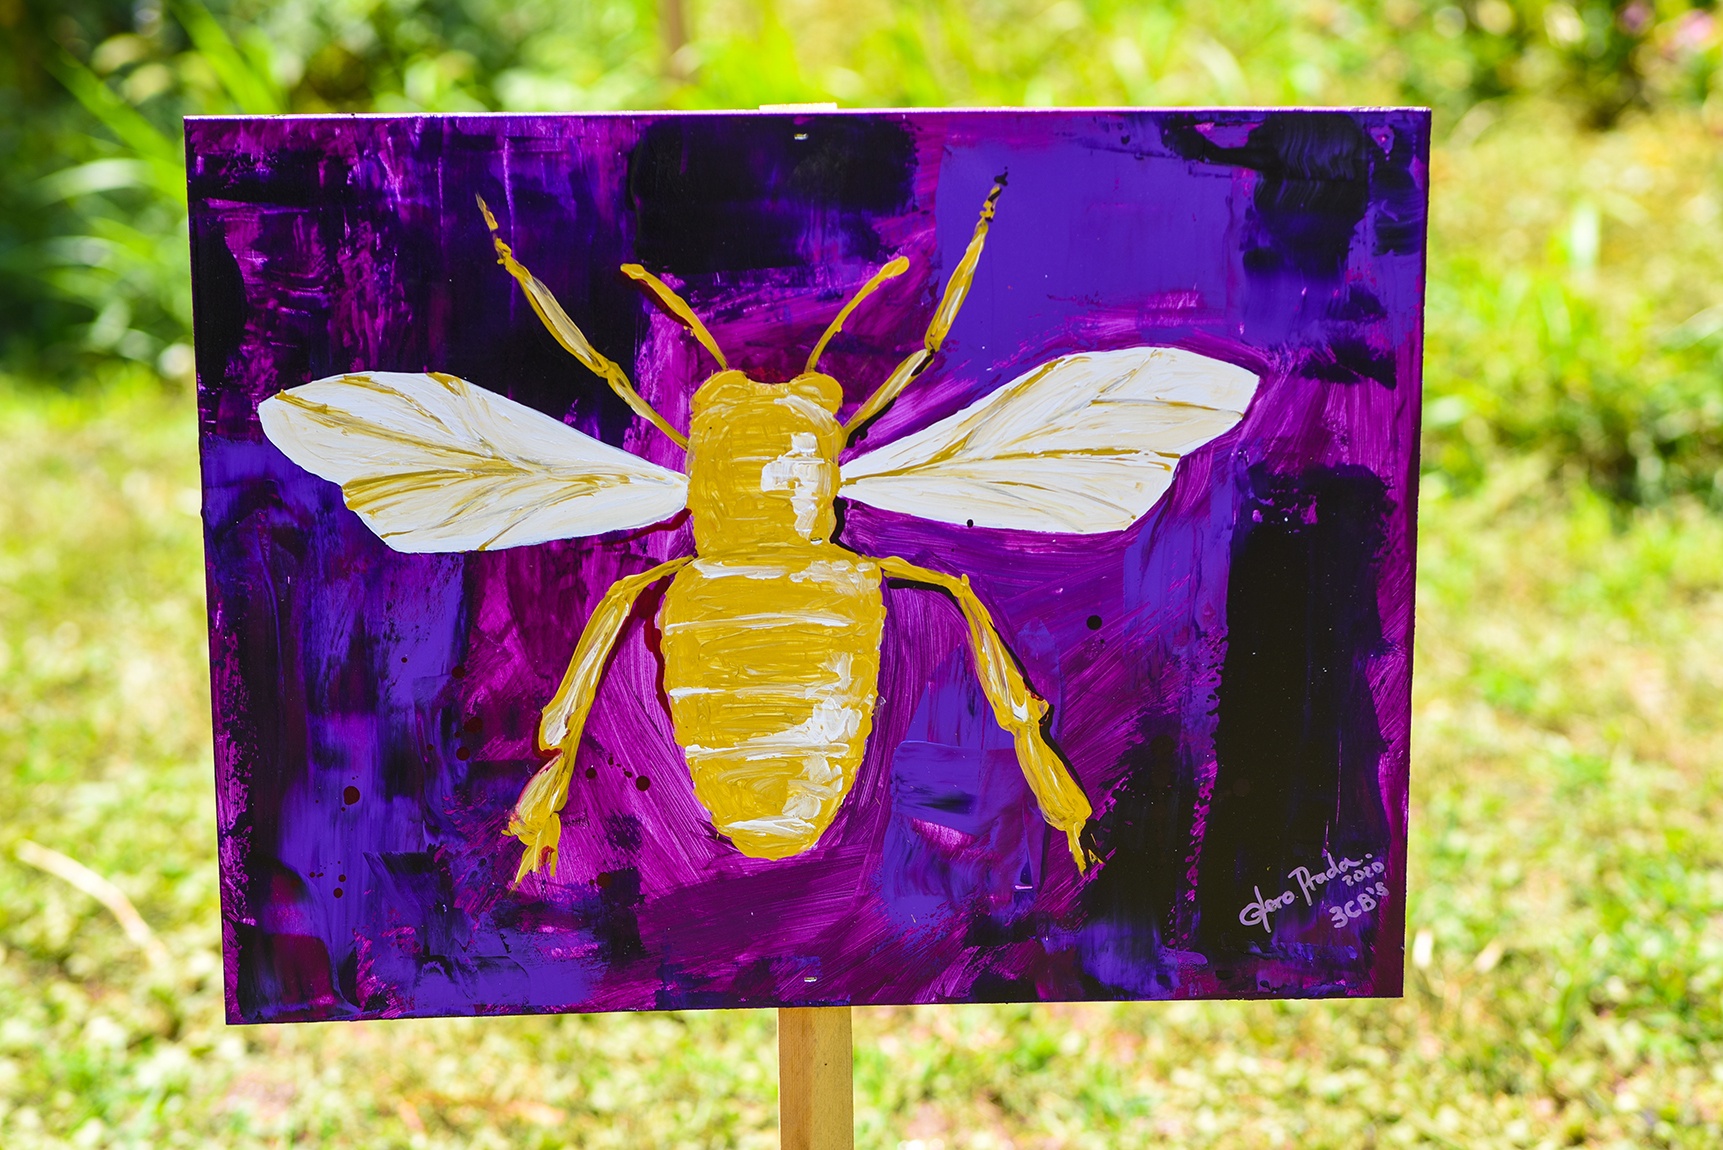 A purple and blue painting of a yellow bee on a post in a grassy field.